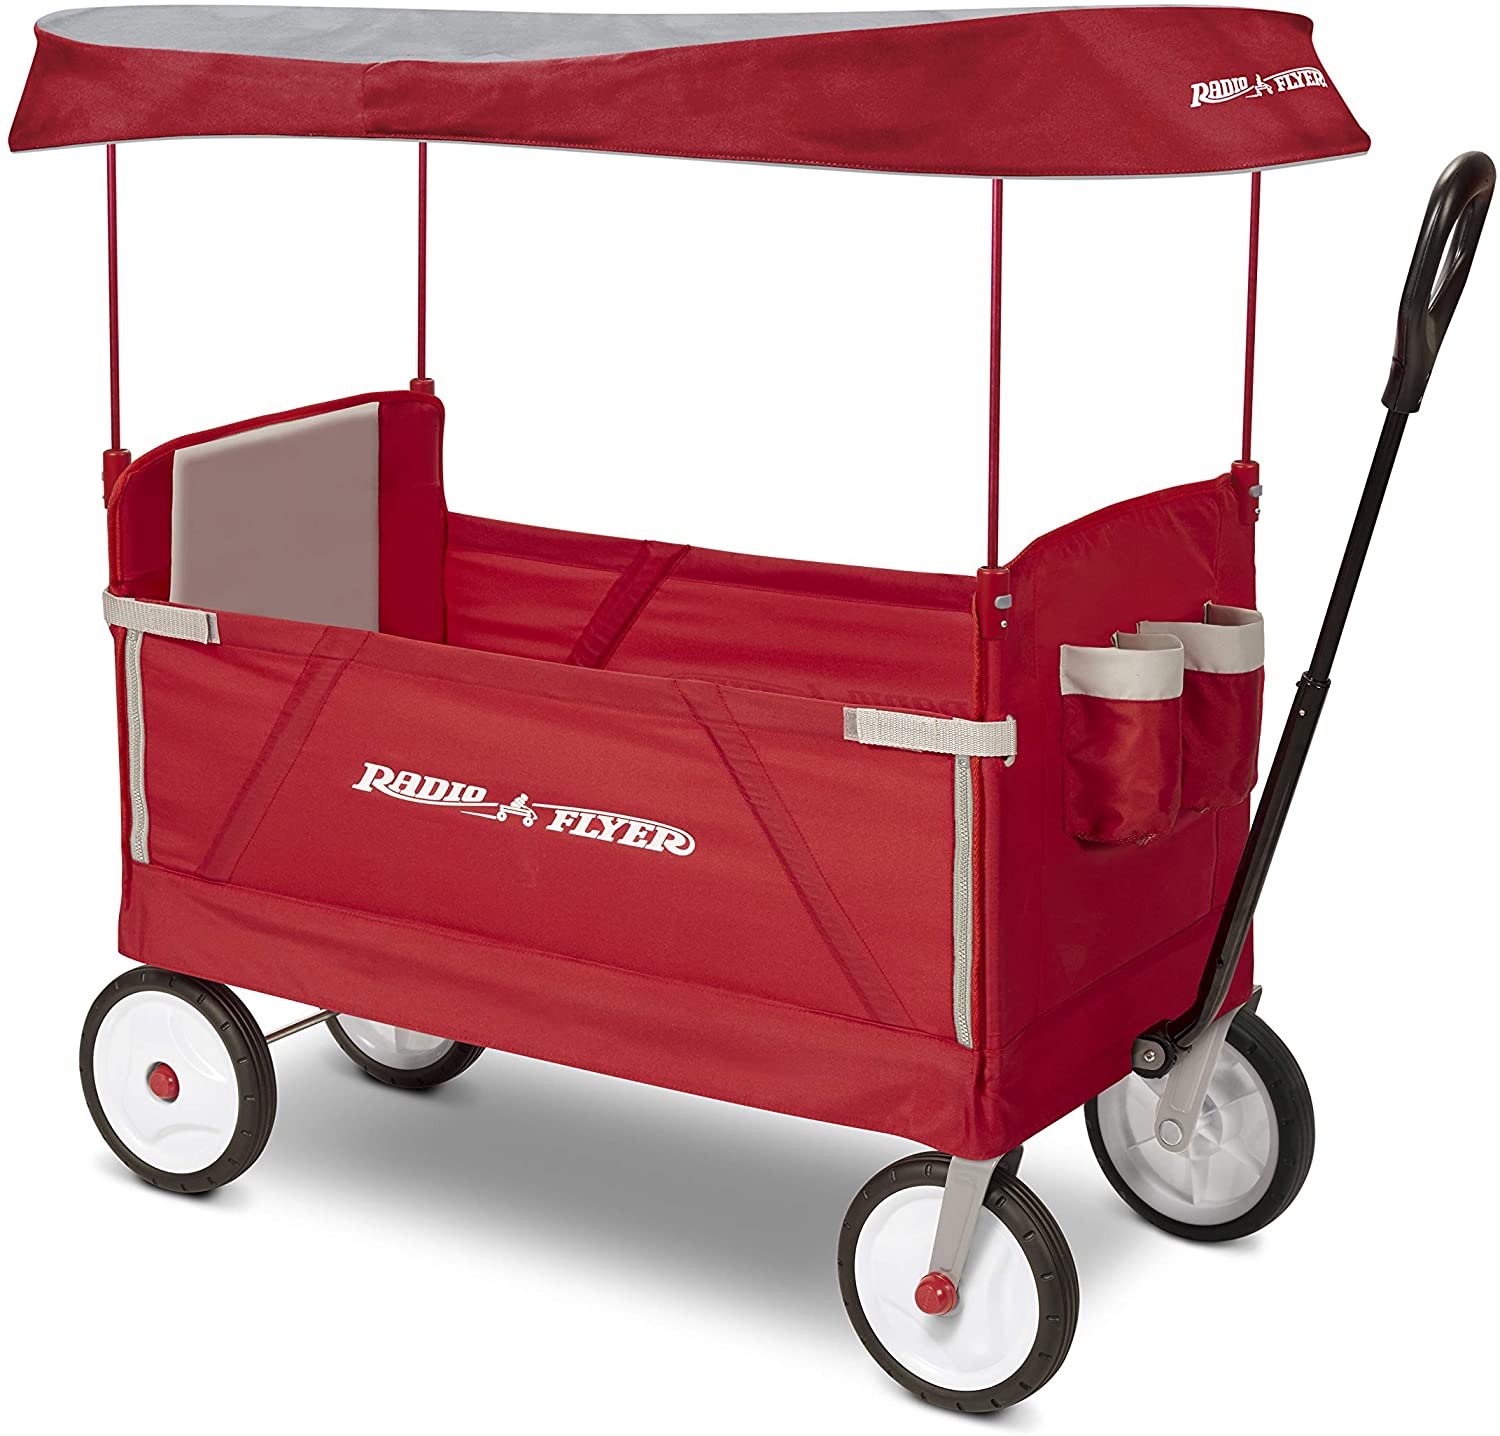 Radio Flyer 3-in-1 EZ Folding Outdoor Collapsible Wagon $74.25 + Free Shipping